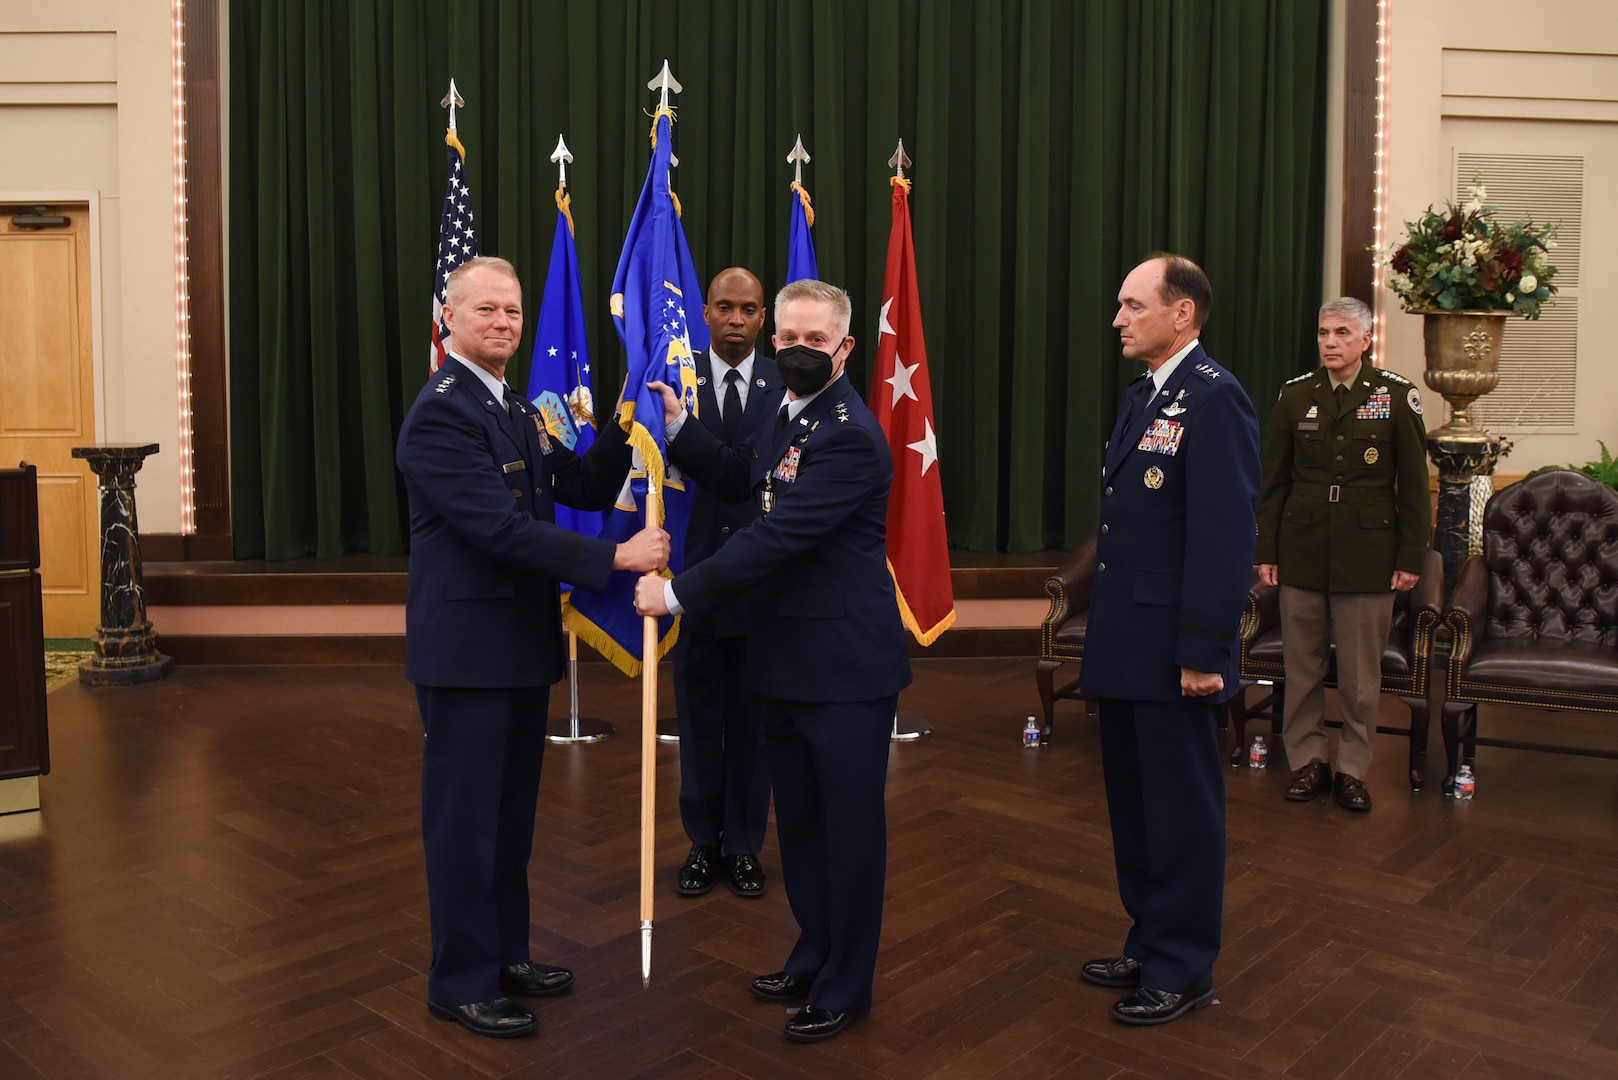 U.S. Air Force Lt. Gen. Timothy Haugh (left), 16th Air Force (Air Forces Cyber) passes the guidon to Gen. Mark Kelly, commander of Air Combat Command, symbolizing the end of his command during a change of command ceremony at Joint Base San Antonio-Lackland, Texas, July 21, 2022.